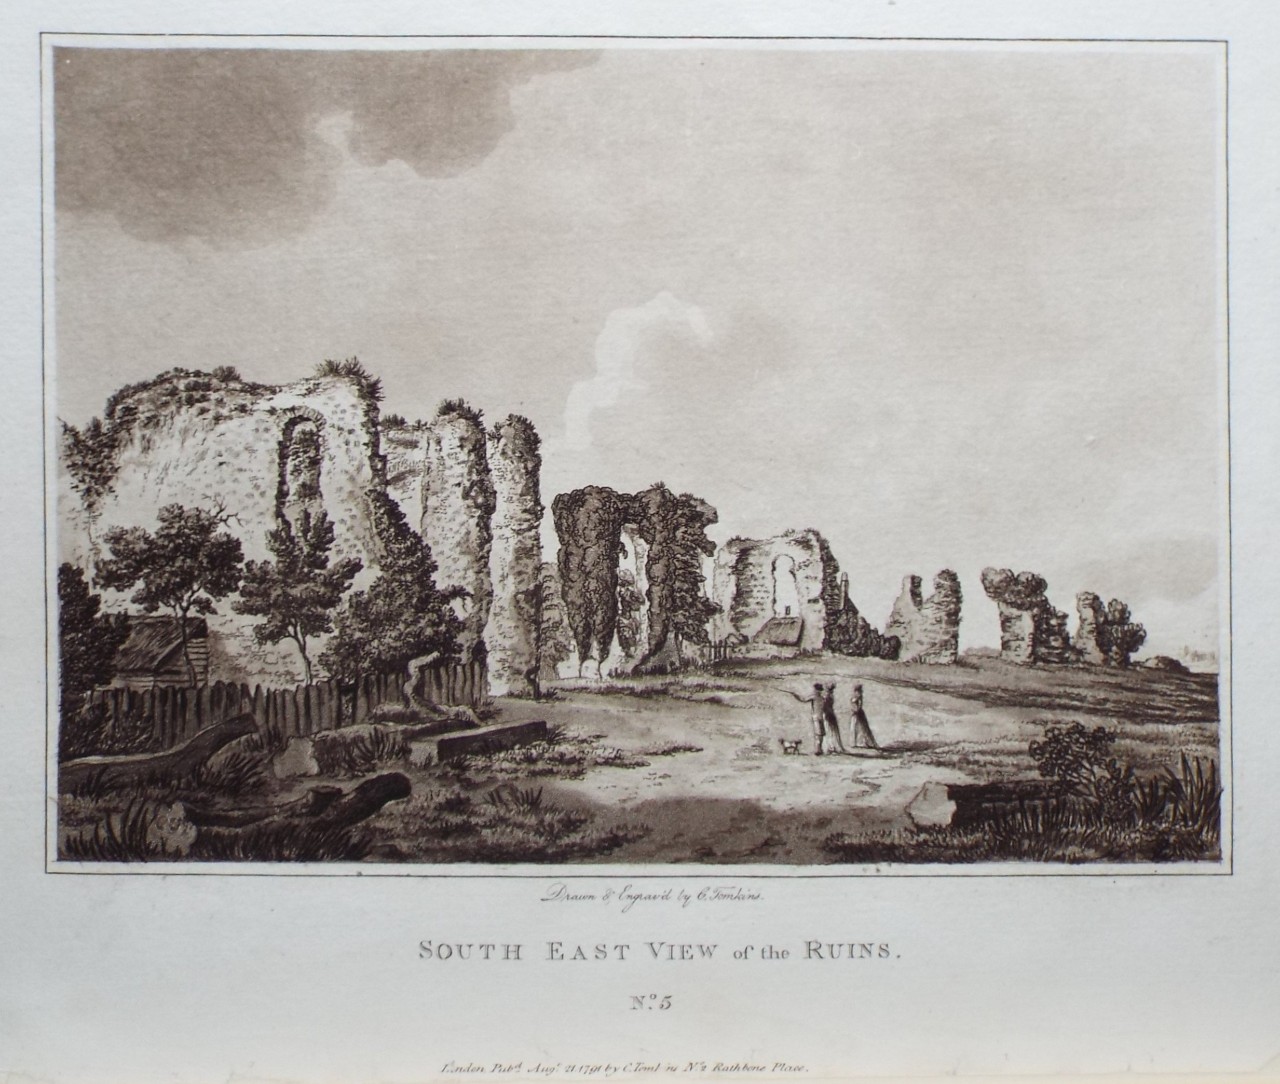 Aquatint - South East View of the Ruins. - Tomkins